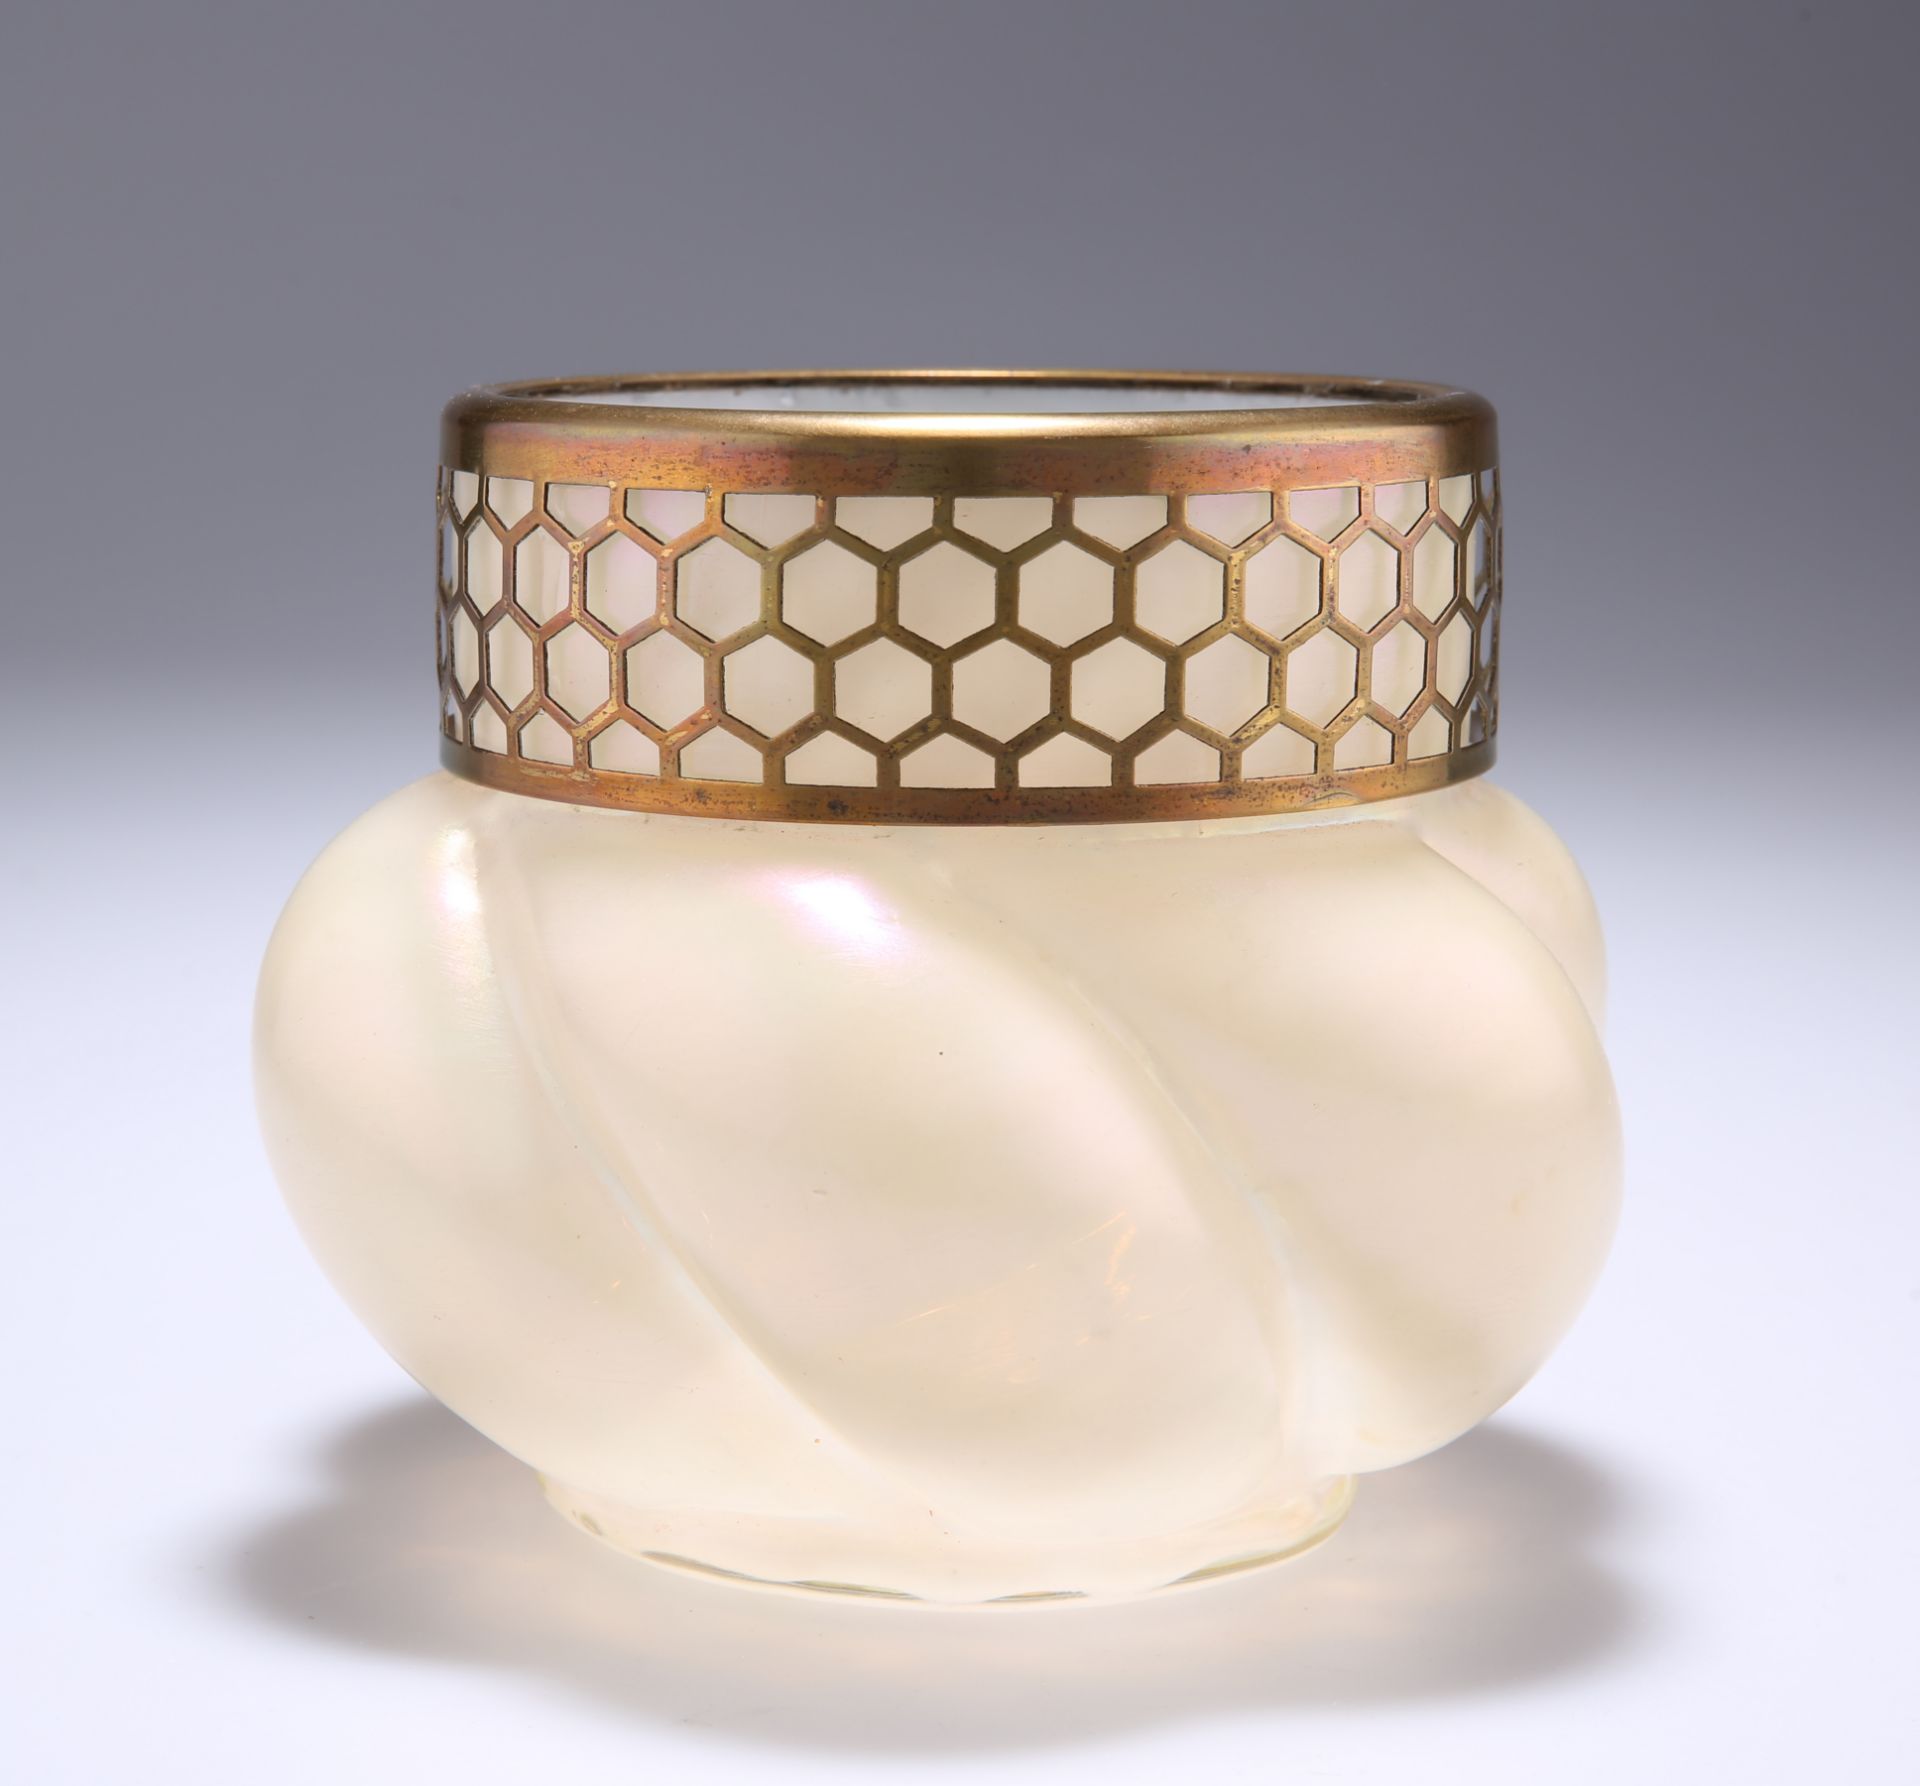 A KRALIK PEARLESCENT GLASS ROSE BOWL, EARLY 20TH CENTURY, boldly wrythen moulded, with applied